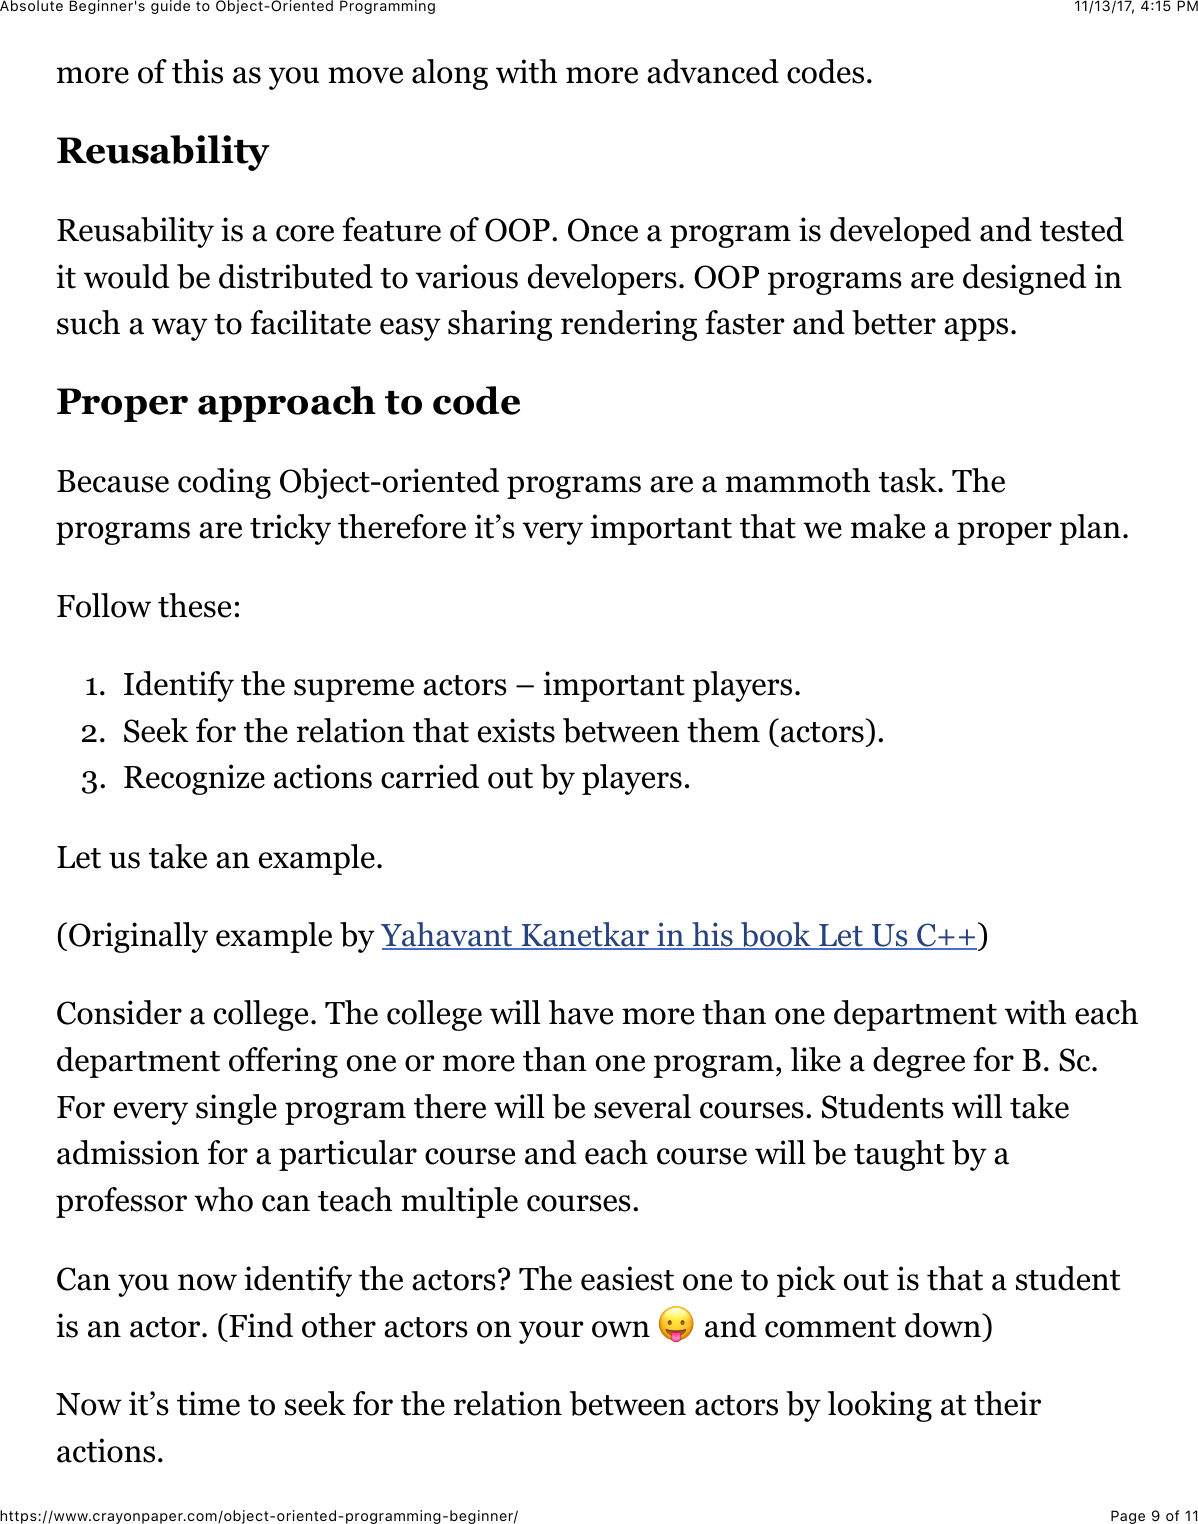 Page 9 of 11 - Absolute Beginner's Guide To Object-Oriented Programming